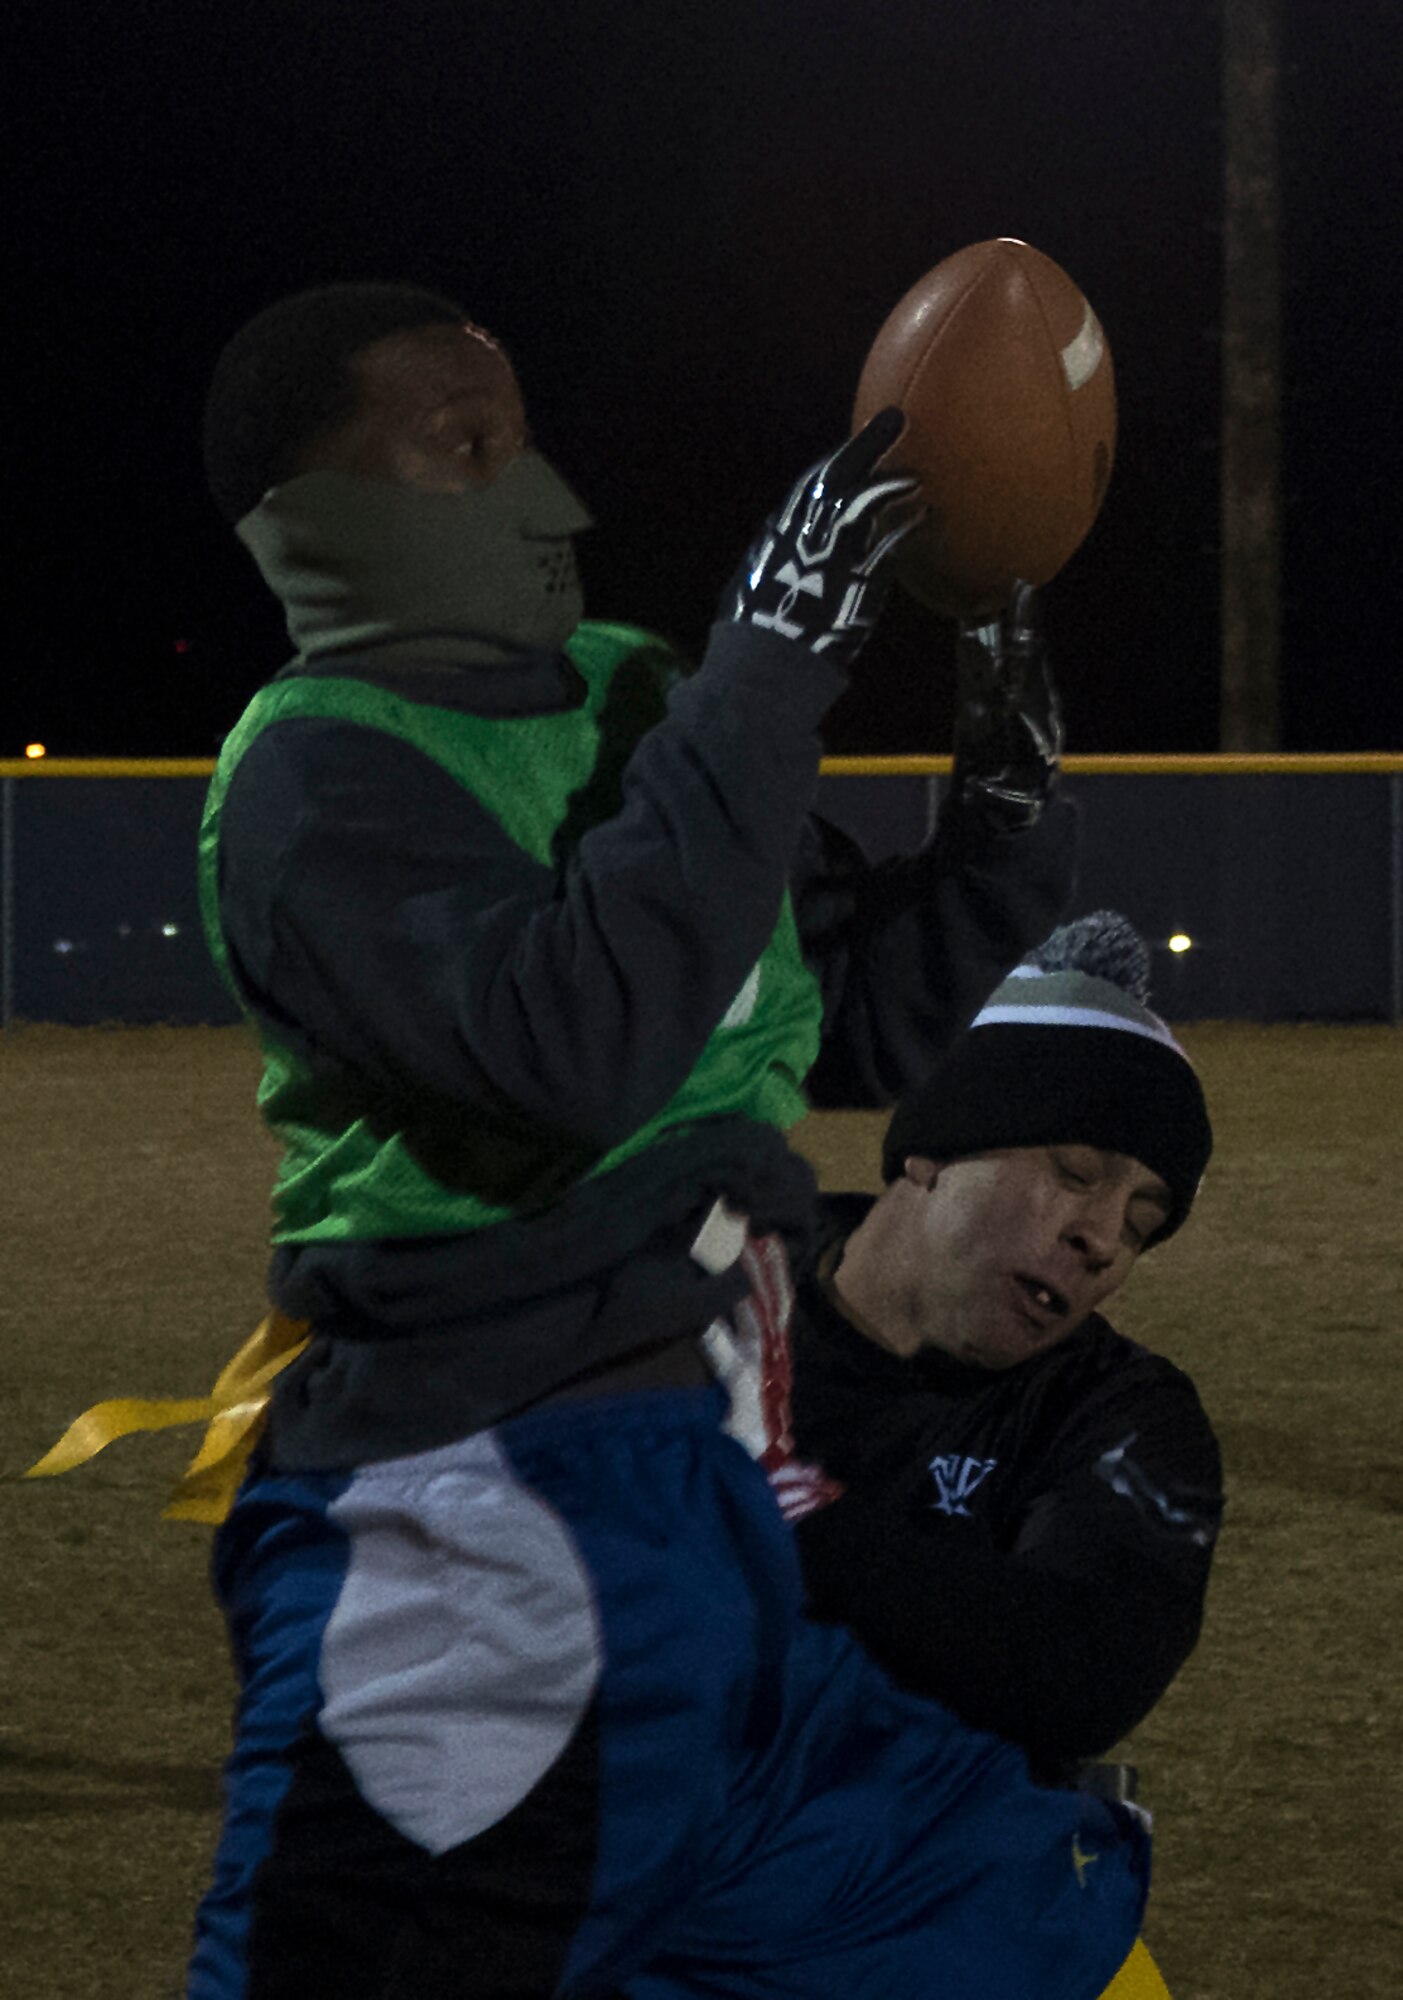 Everette Gaines, 90th Maintenance Group and 20th Air Force intramural flag football team member, catches a pass during the championship game at F.E. Warren Air Force Base, Wyo., Oct. 19, 2016. Teams played with 8 members on the field at a time, resulting in several one-on-one match ups. (U.S. Air Force photo by Senior Airman Brandon Valle)